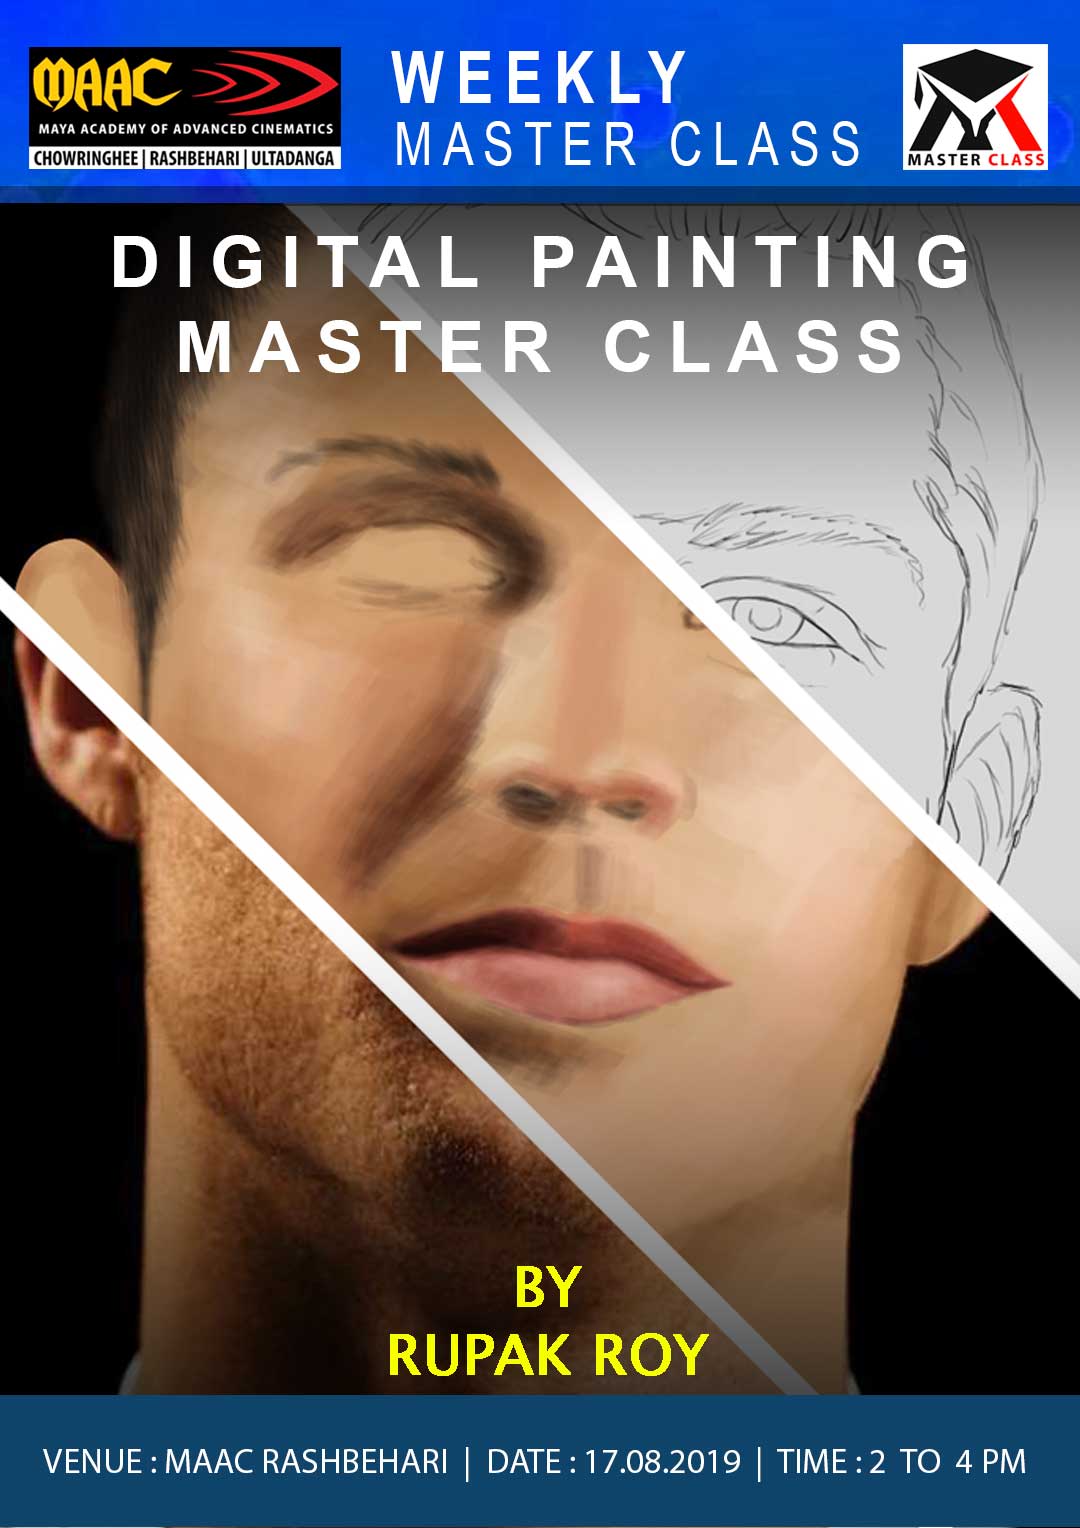 Weekly Master Class on Digital Painting